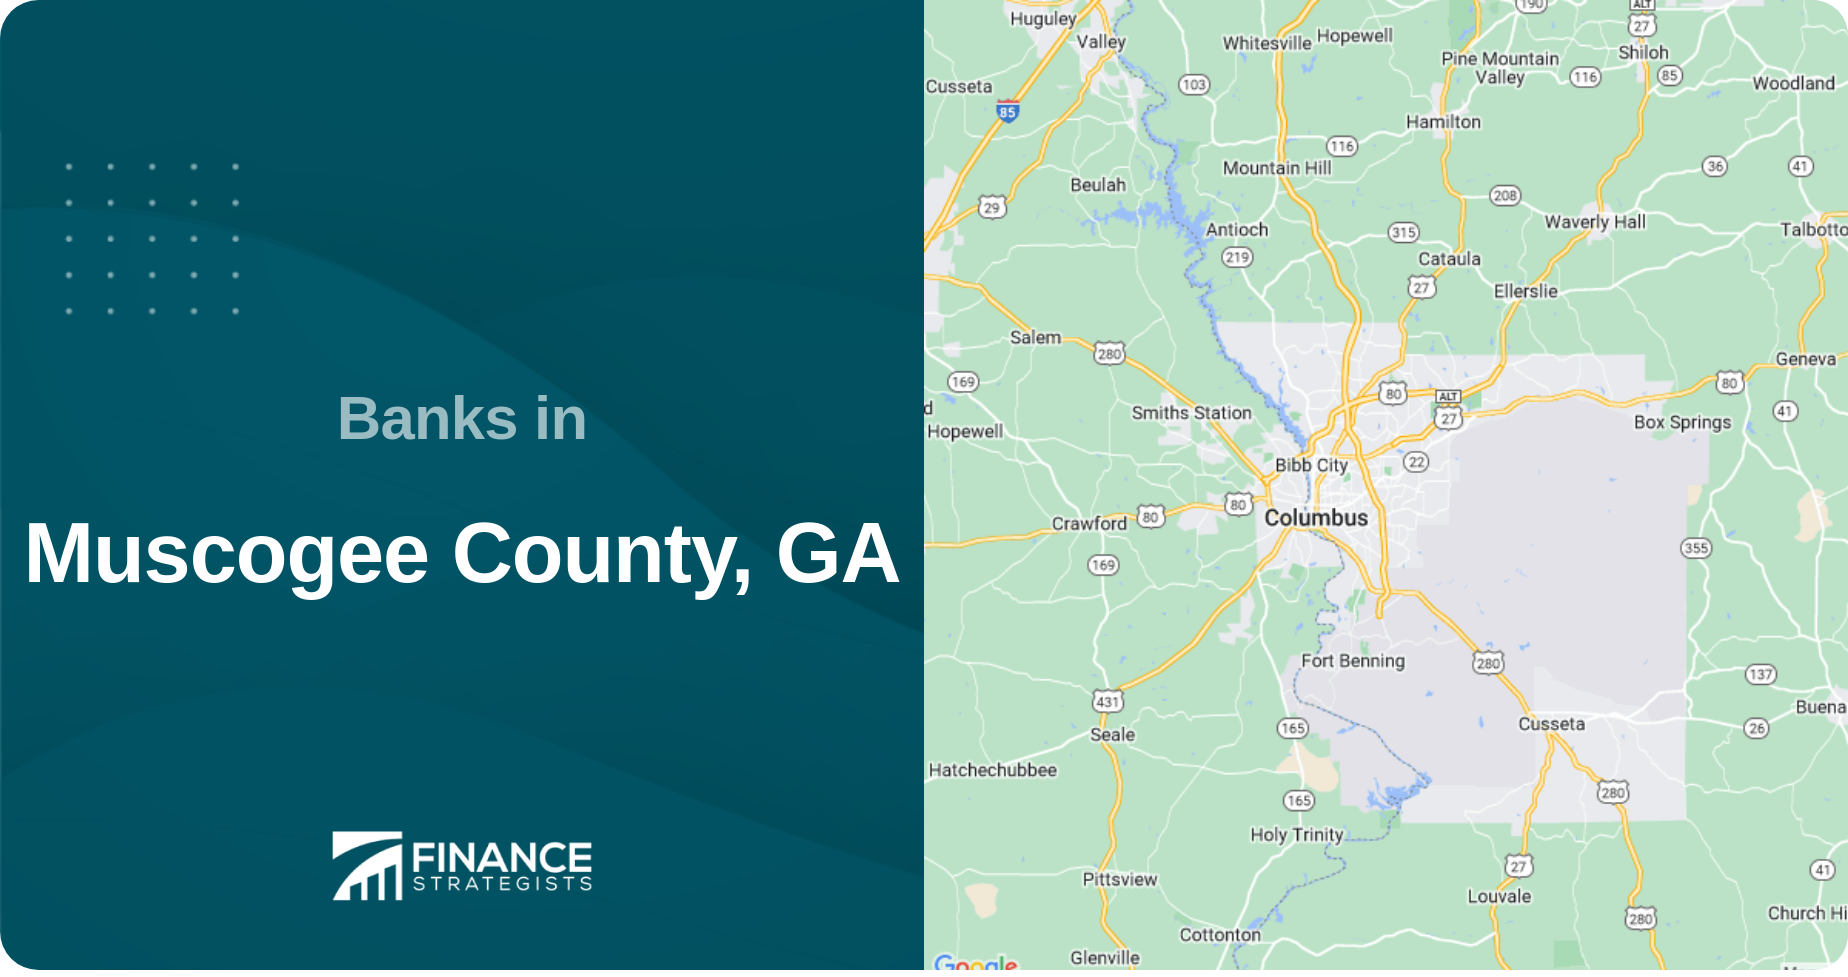 Banks in Muscogee County, GA